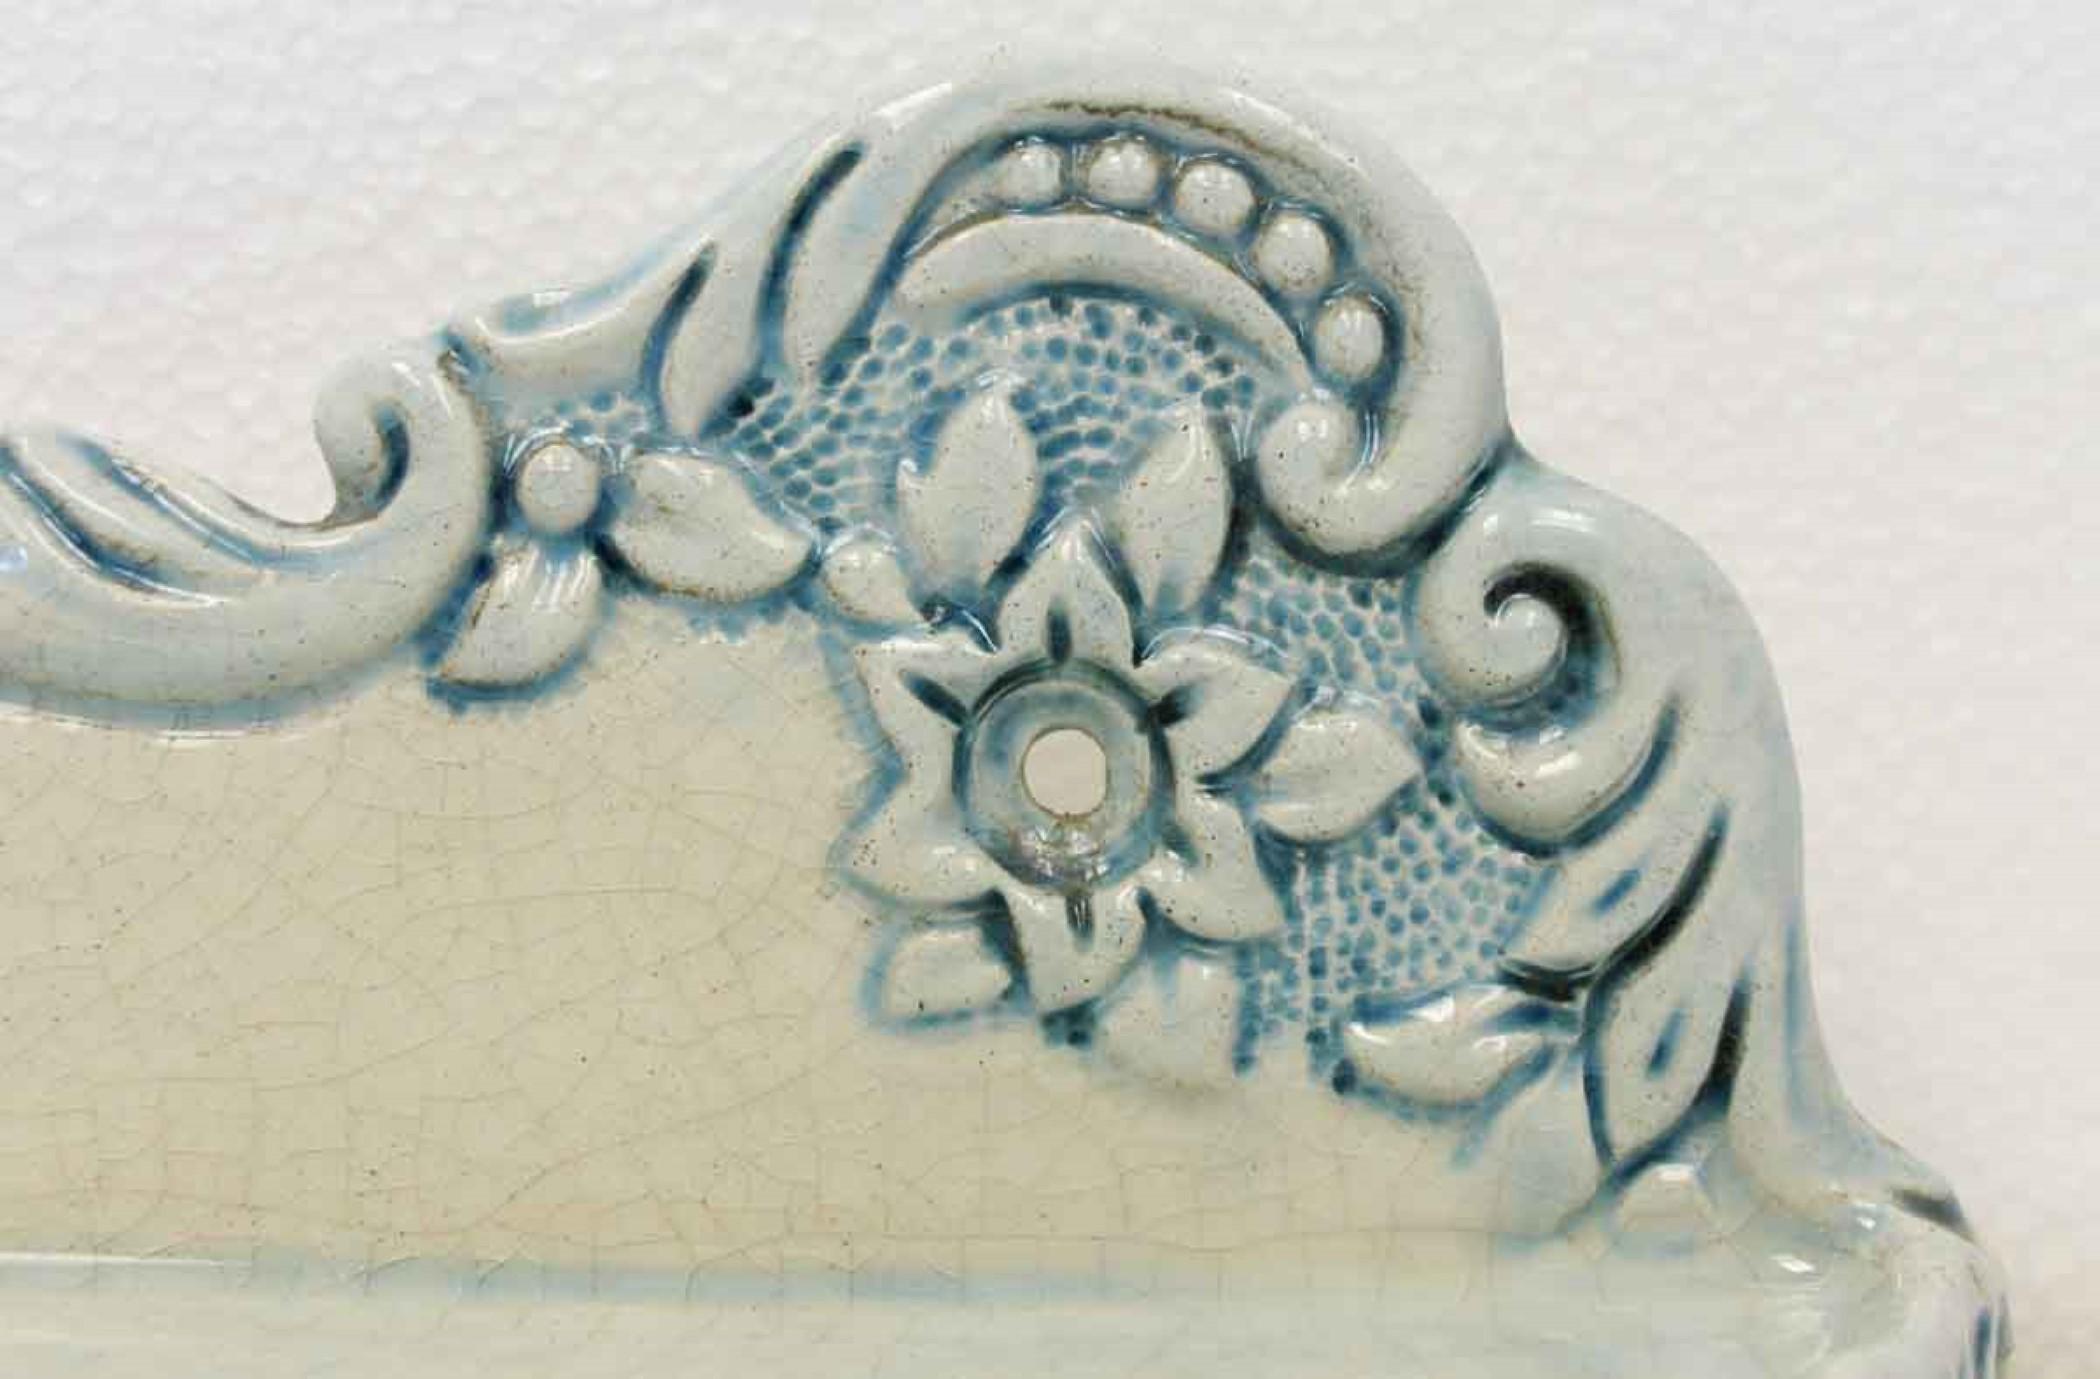 Ceramic 1960s Italian Porcelain Wall Shelf with Floral Details and Crackled Glaze